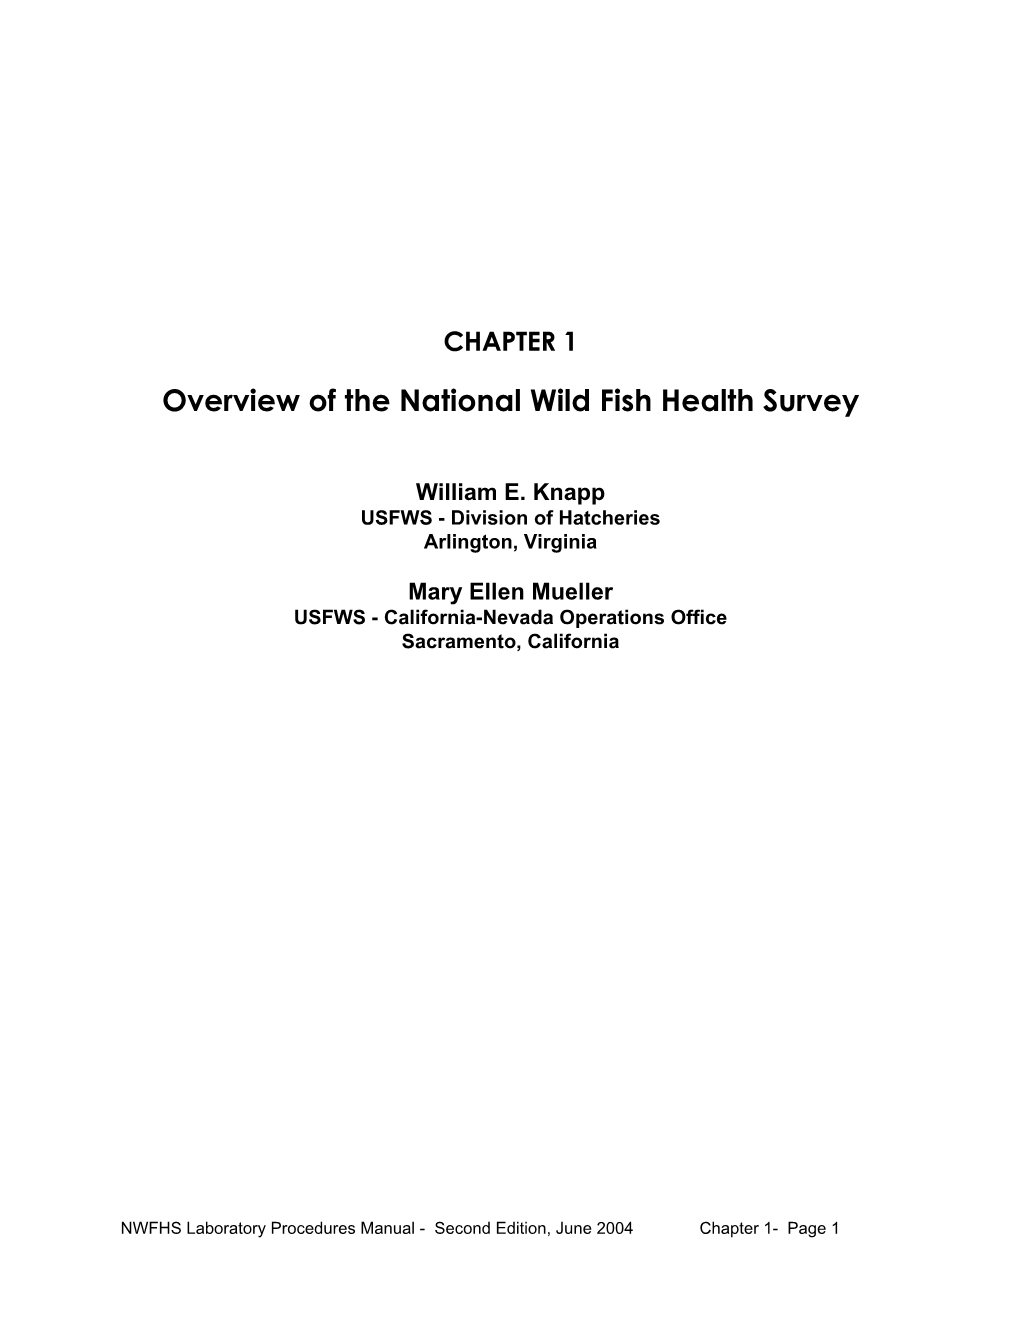 Overview of the National Wild Fish Health Survey